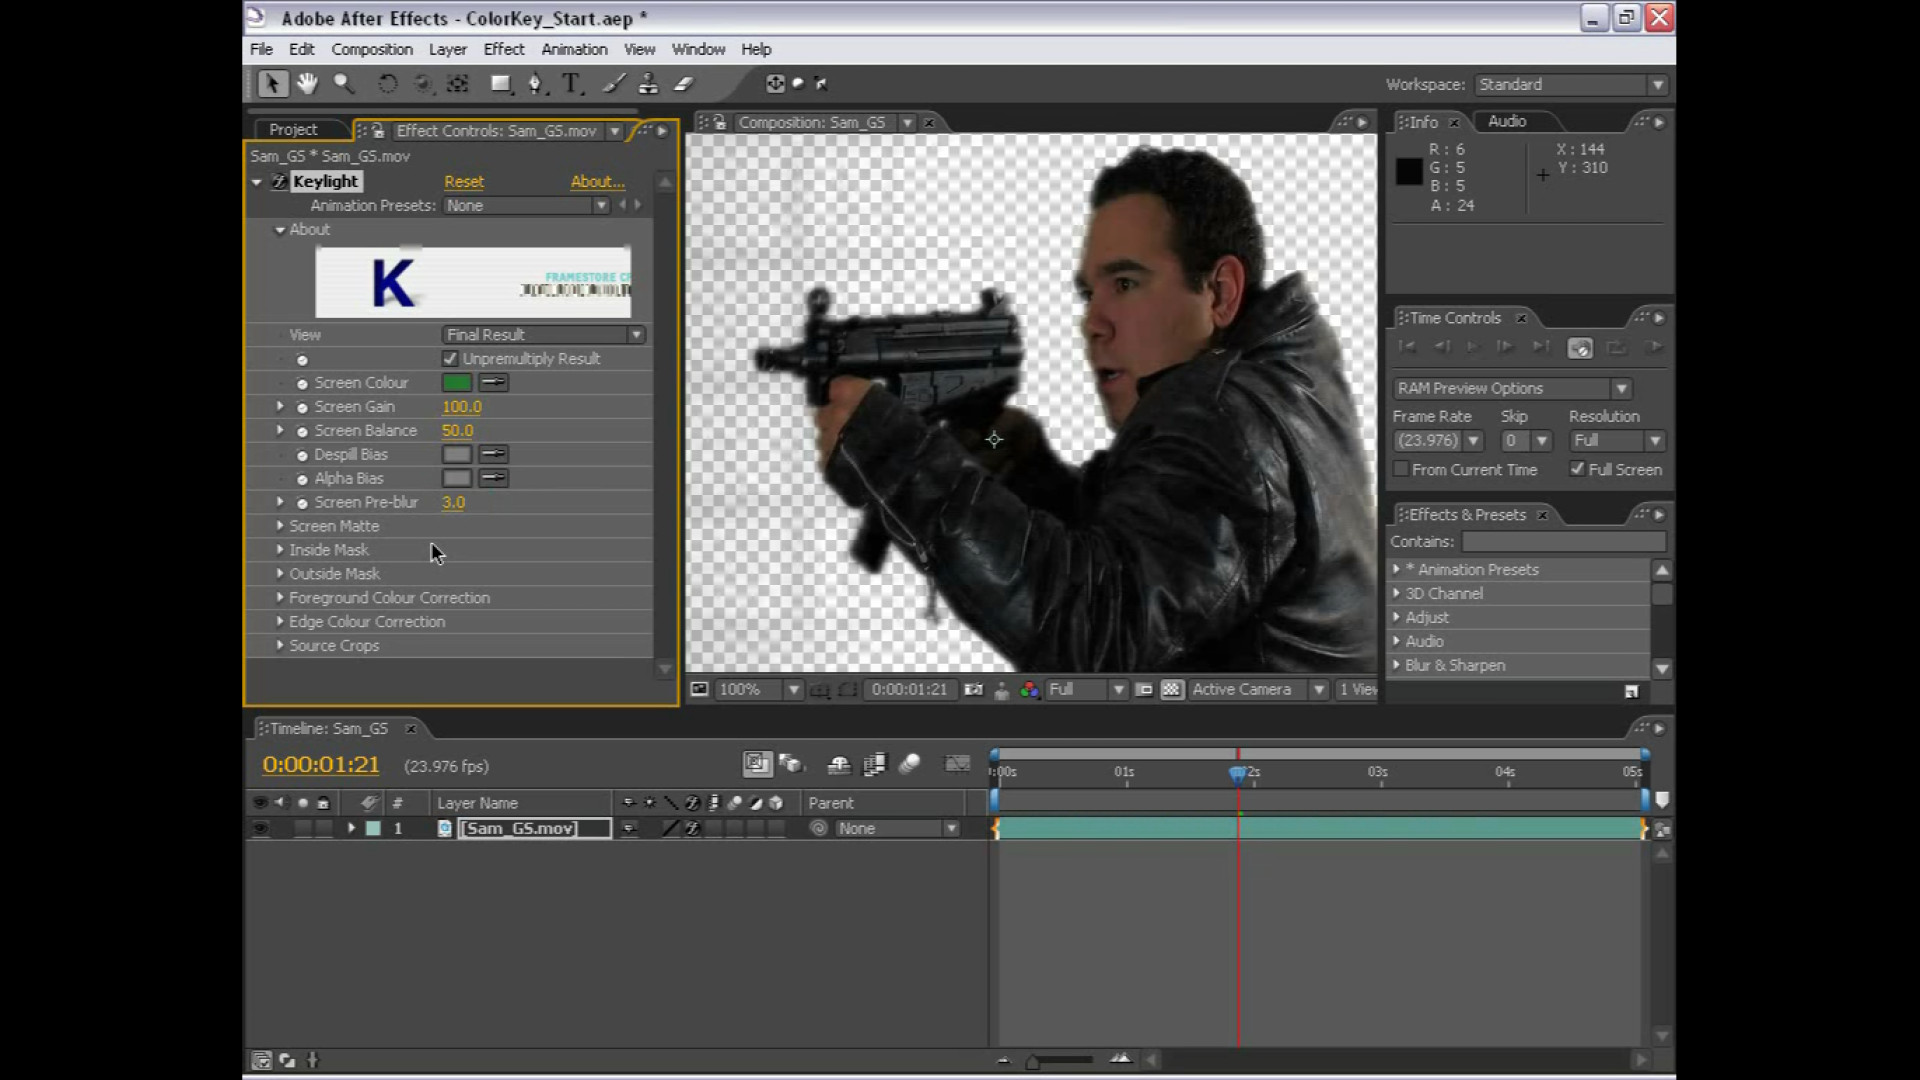 After effect ключи. Adobe after Effects уроки. Adobe after Effects хромакей. Ключи after Effects. Экран after Effects.